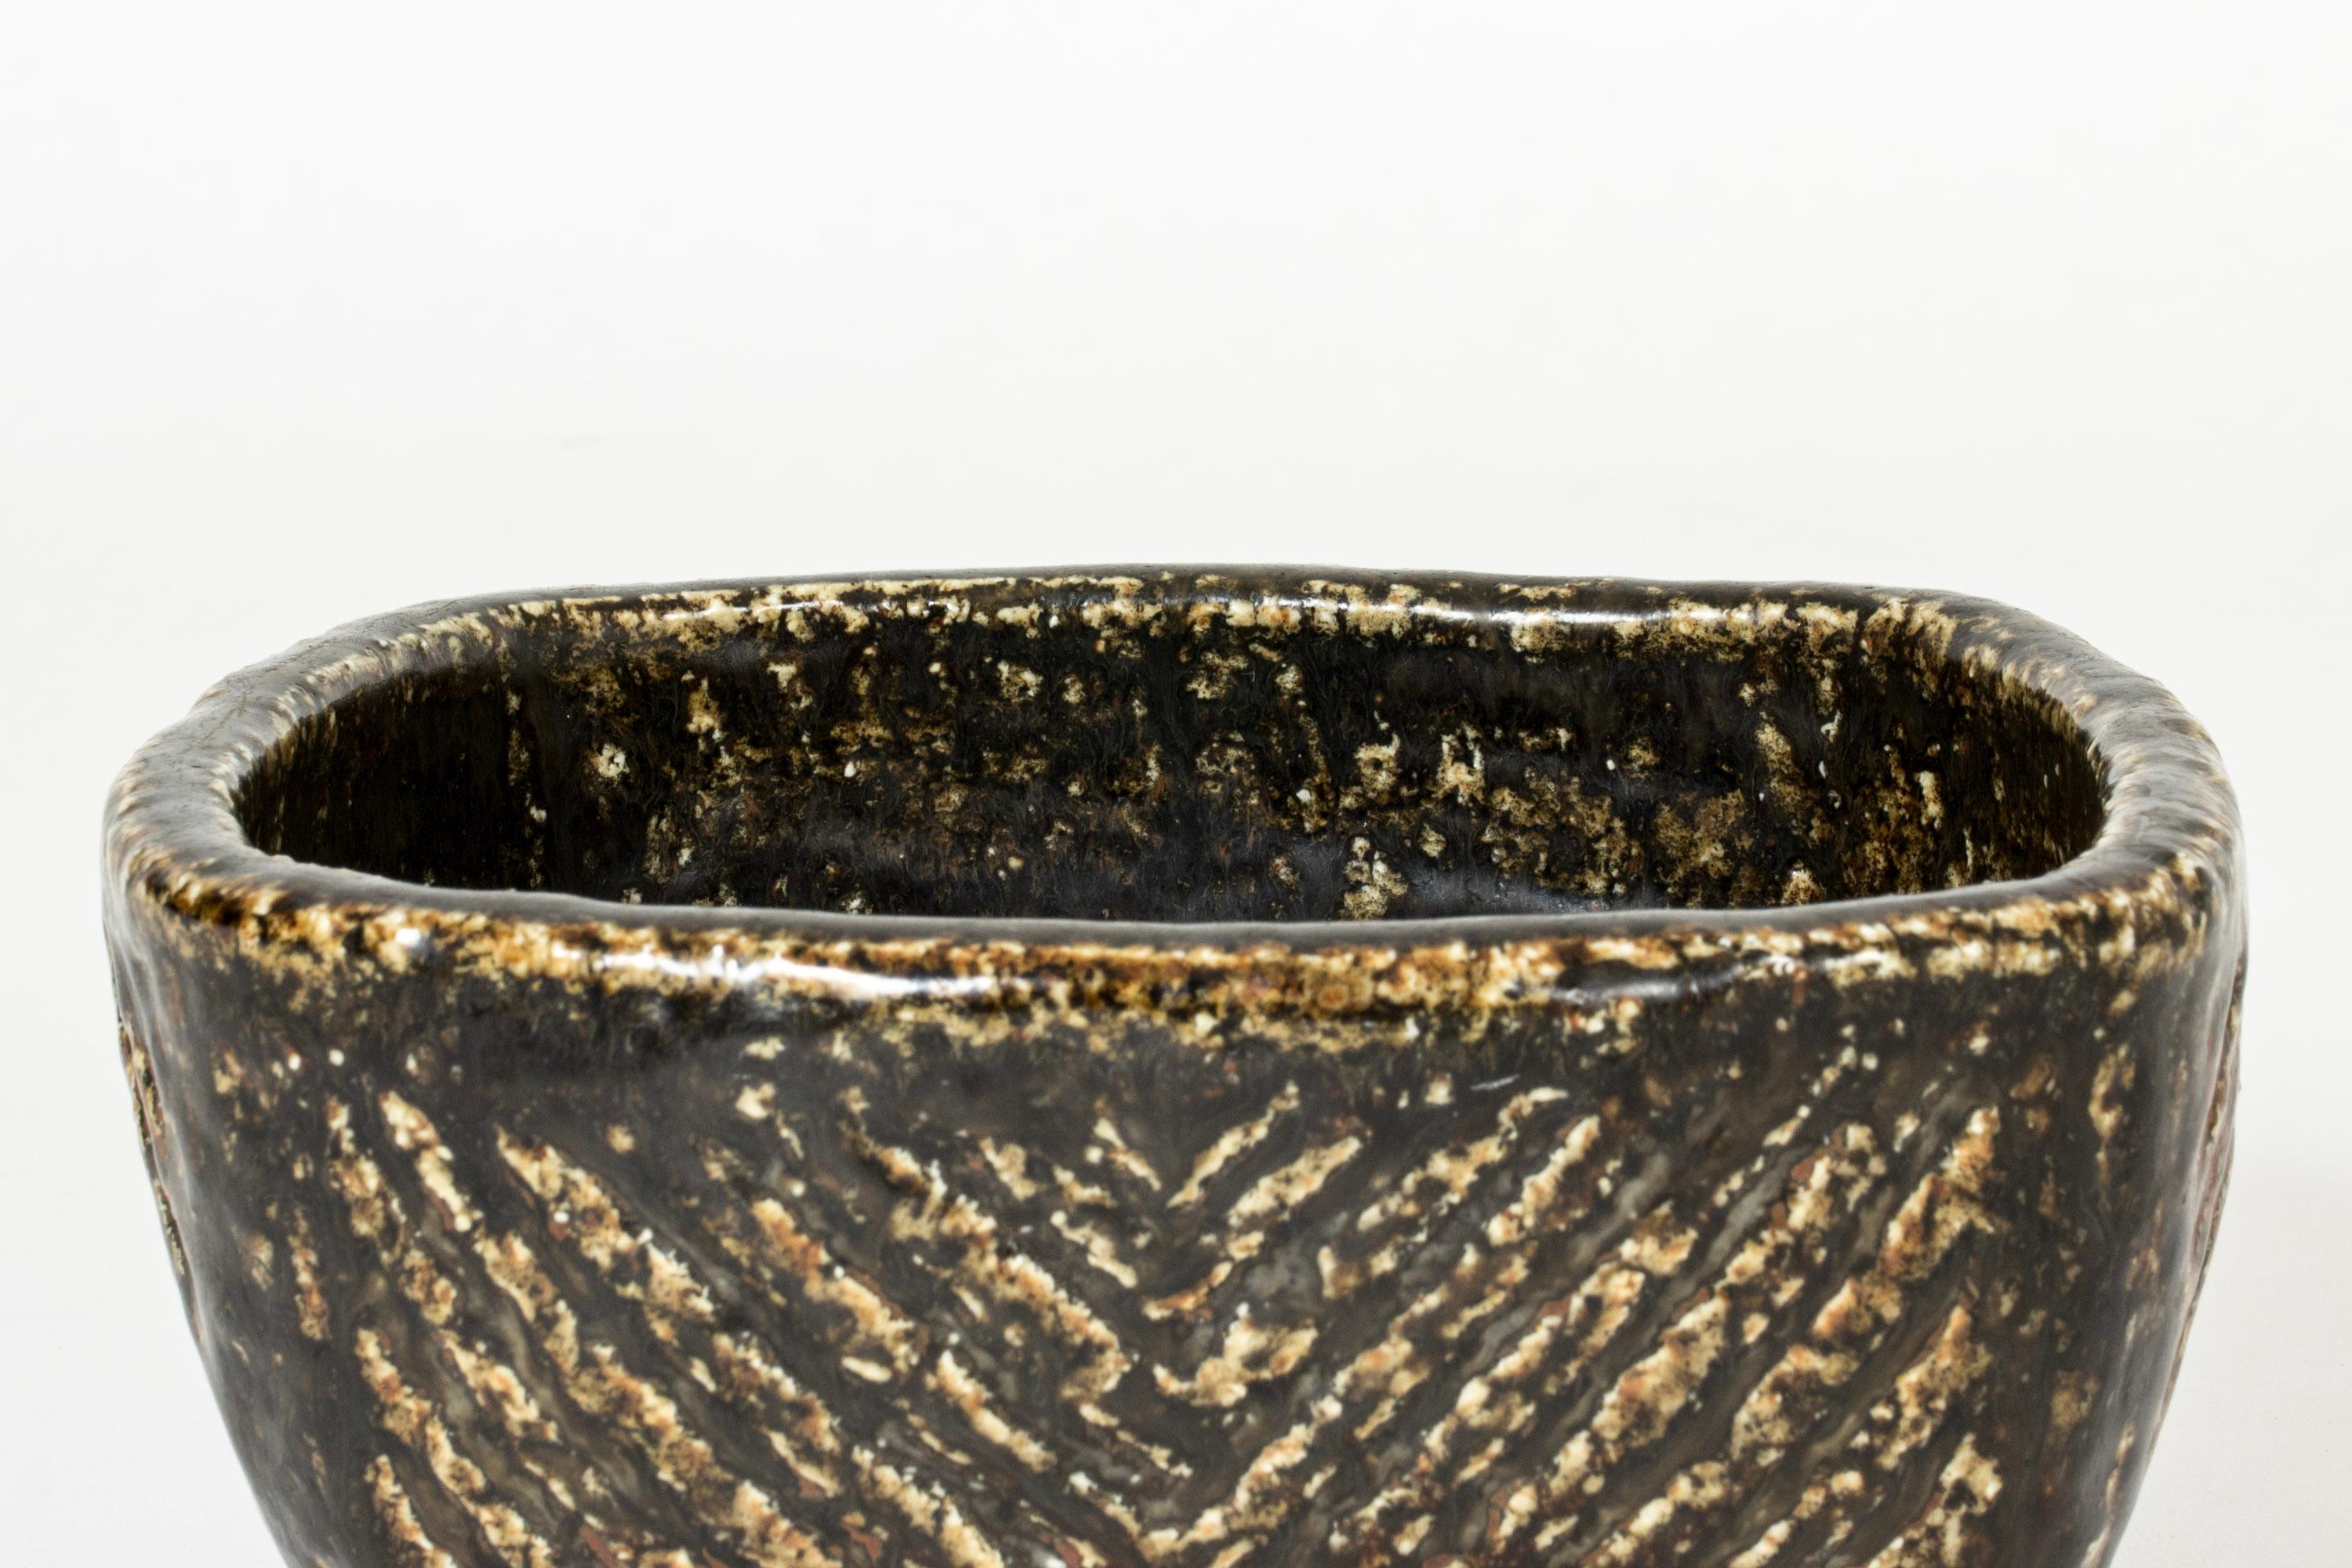 Unique chamotte bowl by Carl-Harry Stålhane, made in a heavyset design with dark, thick glaze, typical of his 1960s production. Bark-like effect.

Carl-Harry Stålhane was one of the stars among Swedish ceramic artists during the 1950s, 1960s and